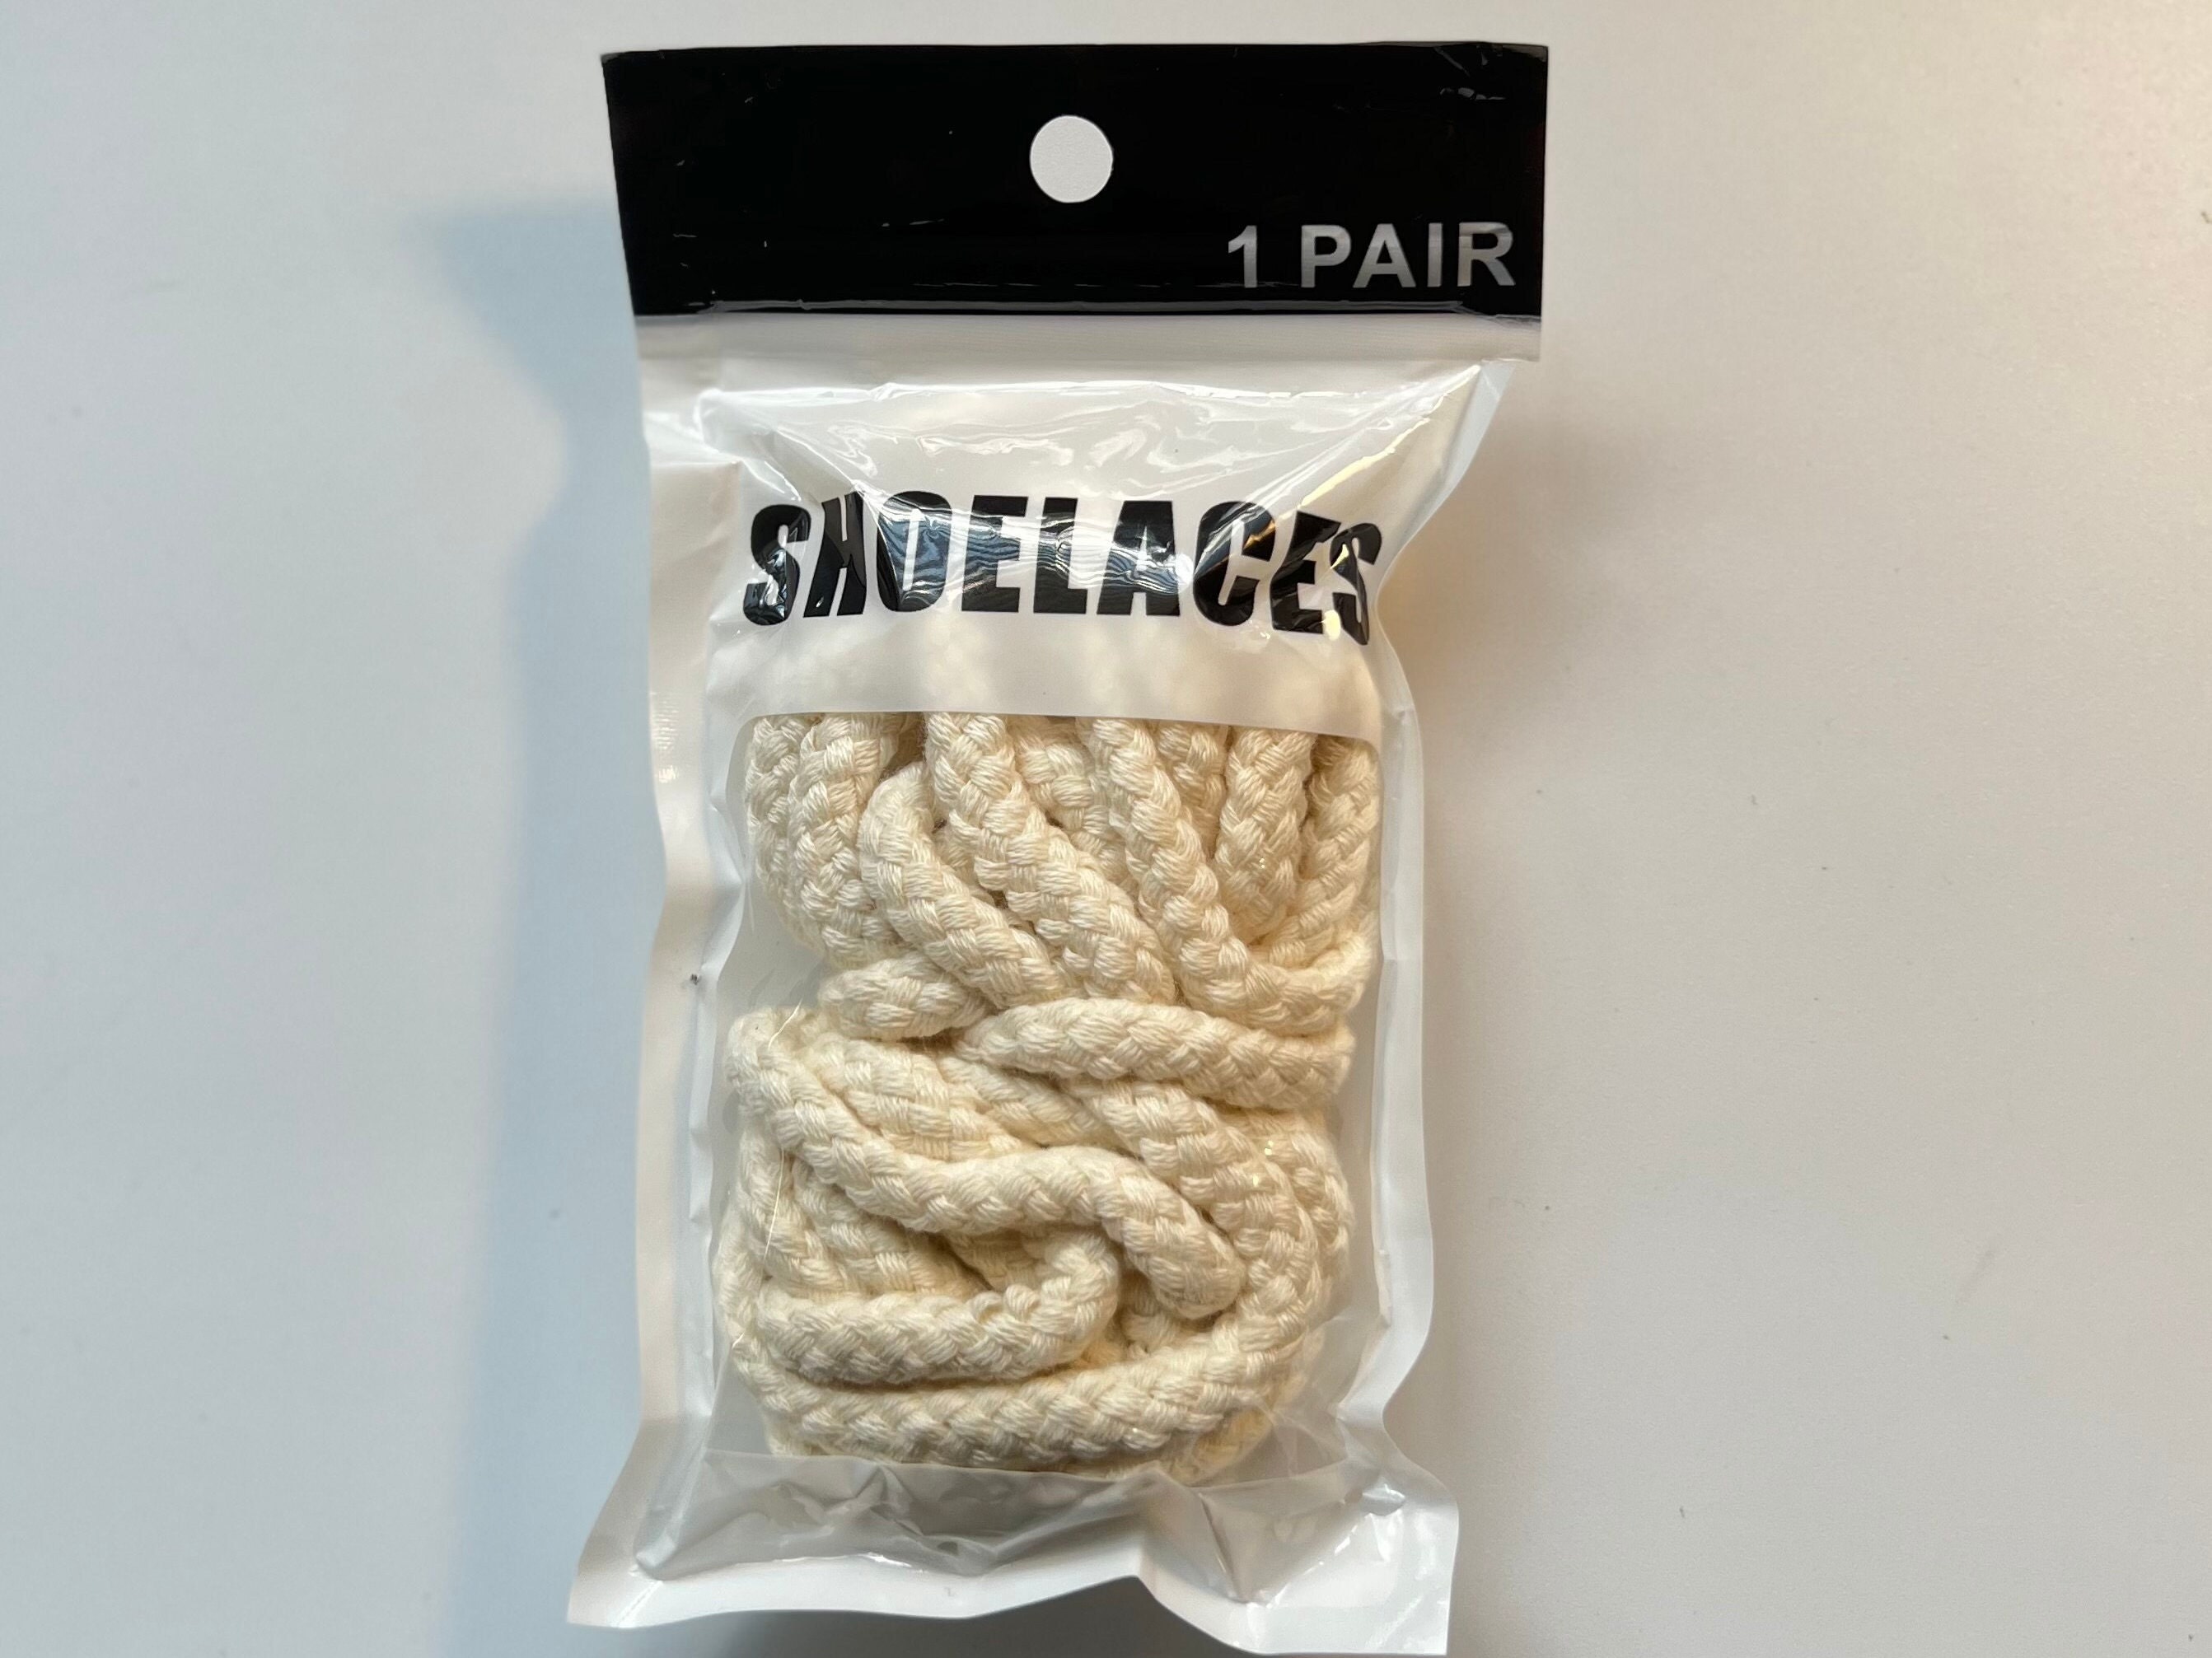 Rope Thick Laces – Rare Shoelaces